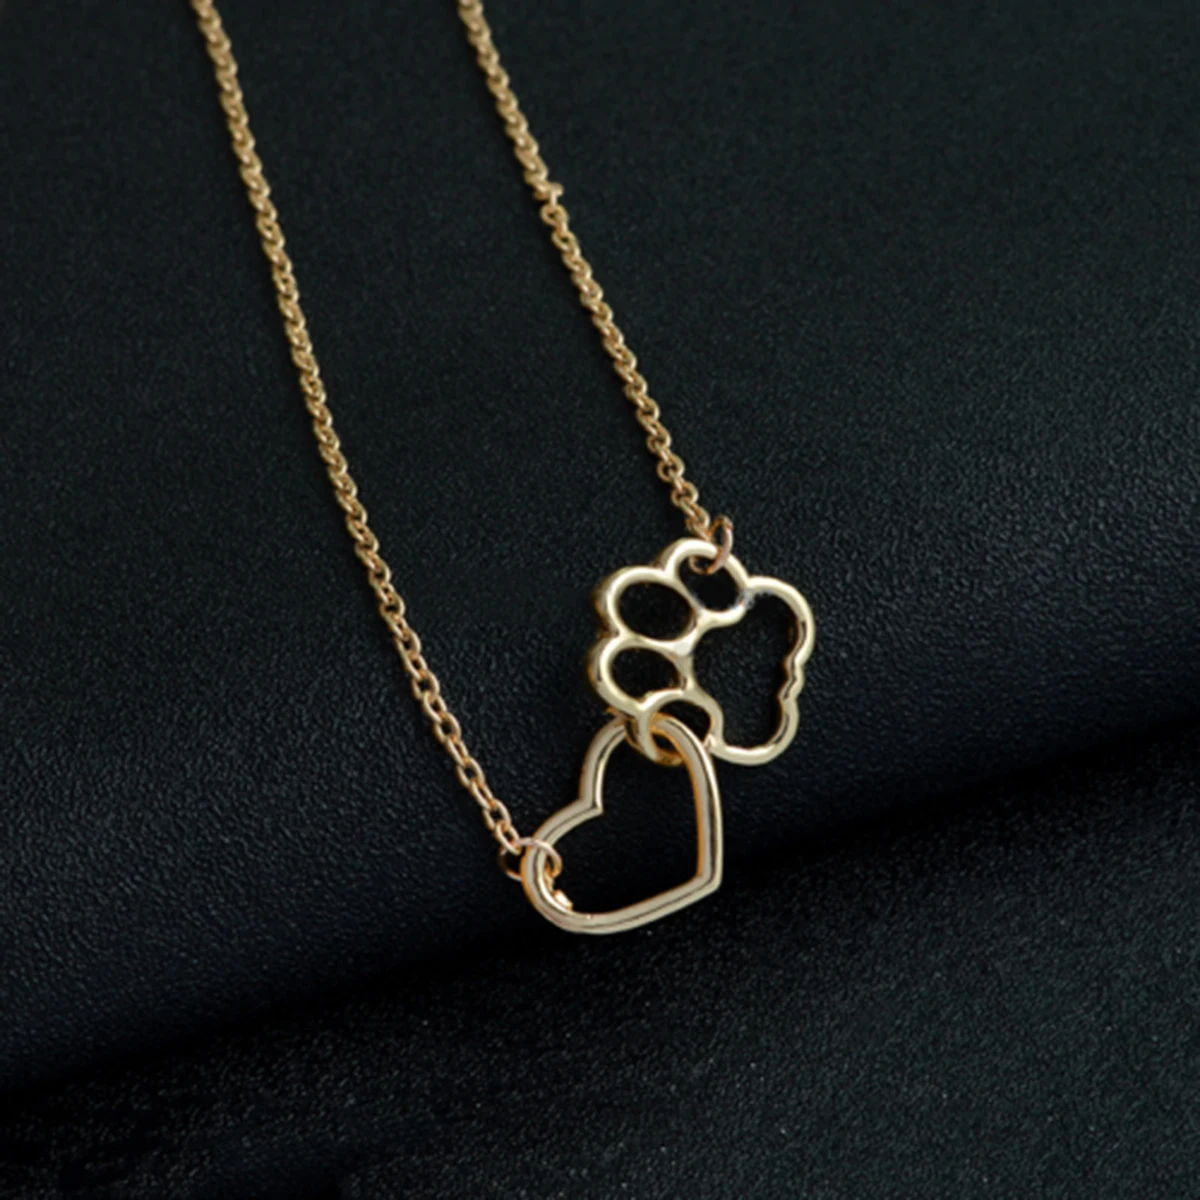 Hollow Pet Paw Footprint Necklaces Shellhard Cute Animal Dog Cat Love Heart Pendant Necklace For Women Girls Jewelry Necklace